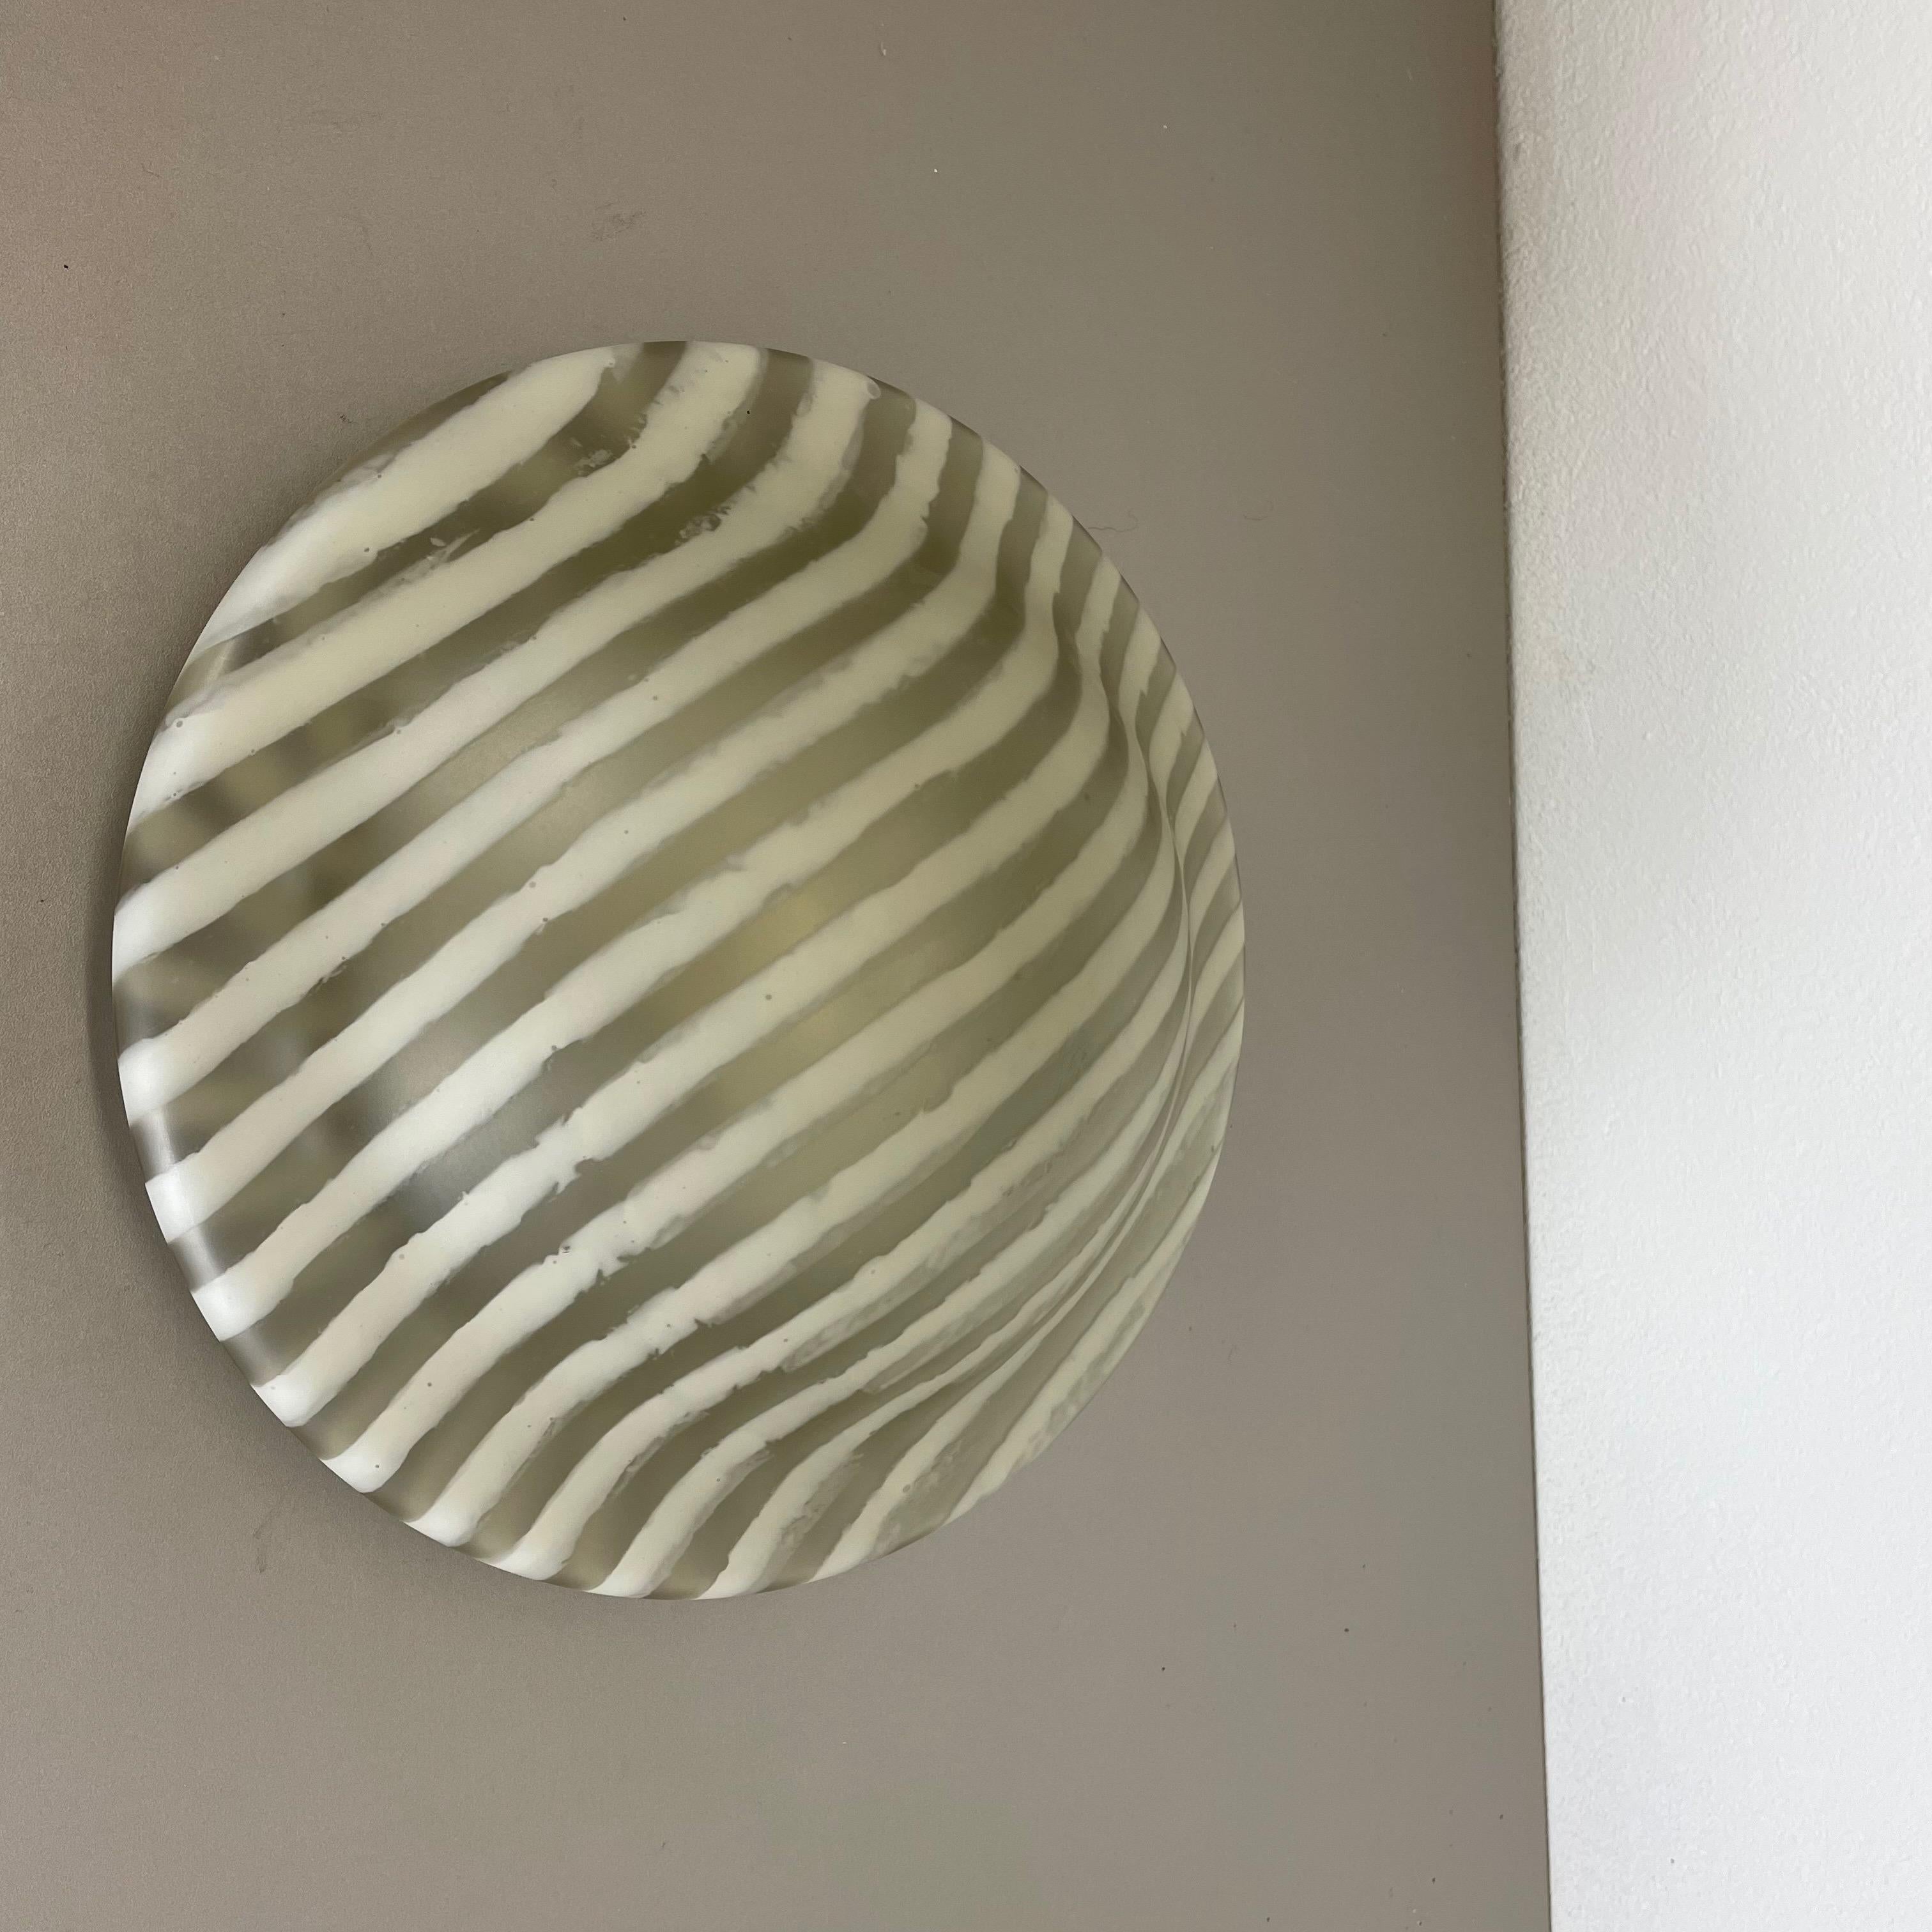 Article:

Wall ceiling light 